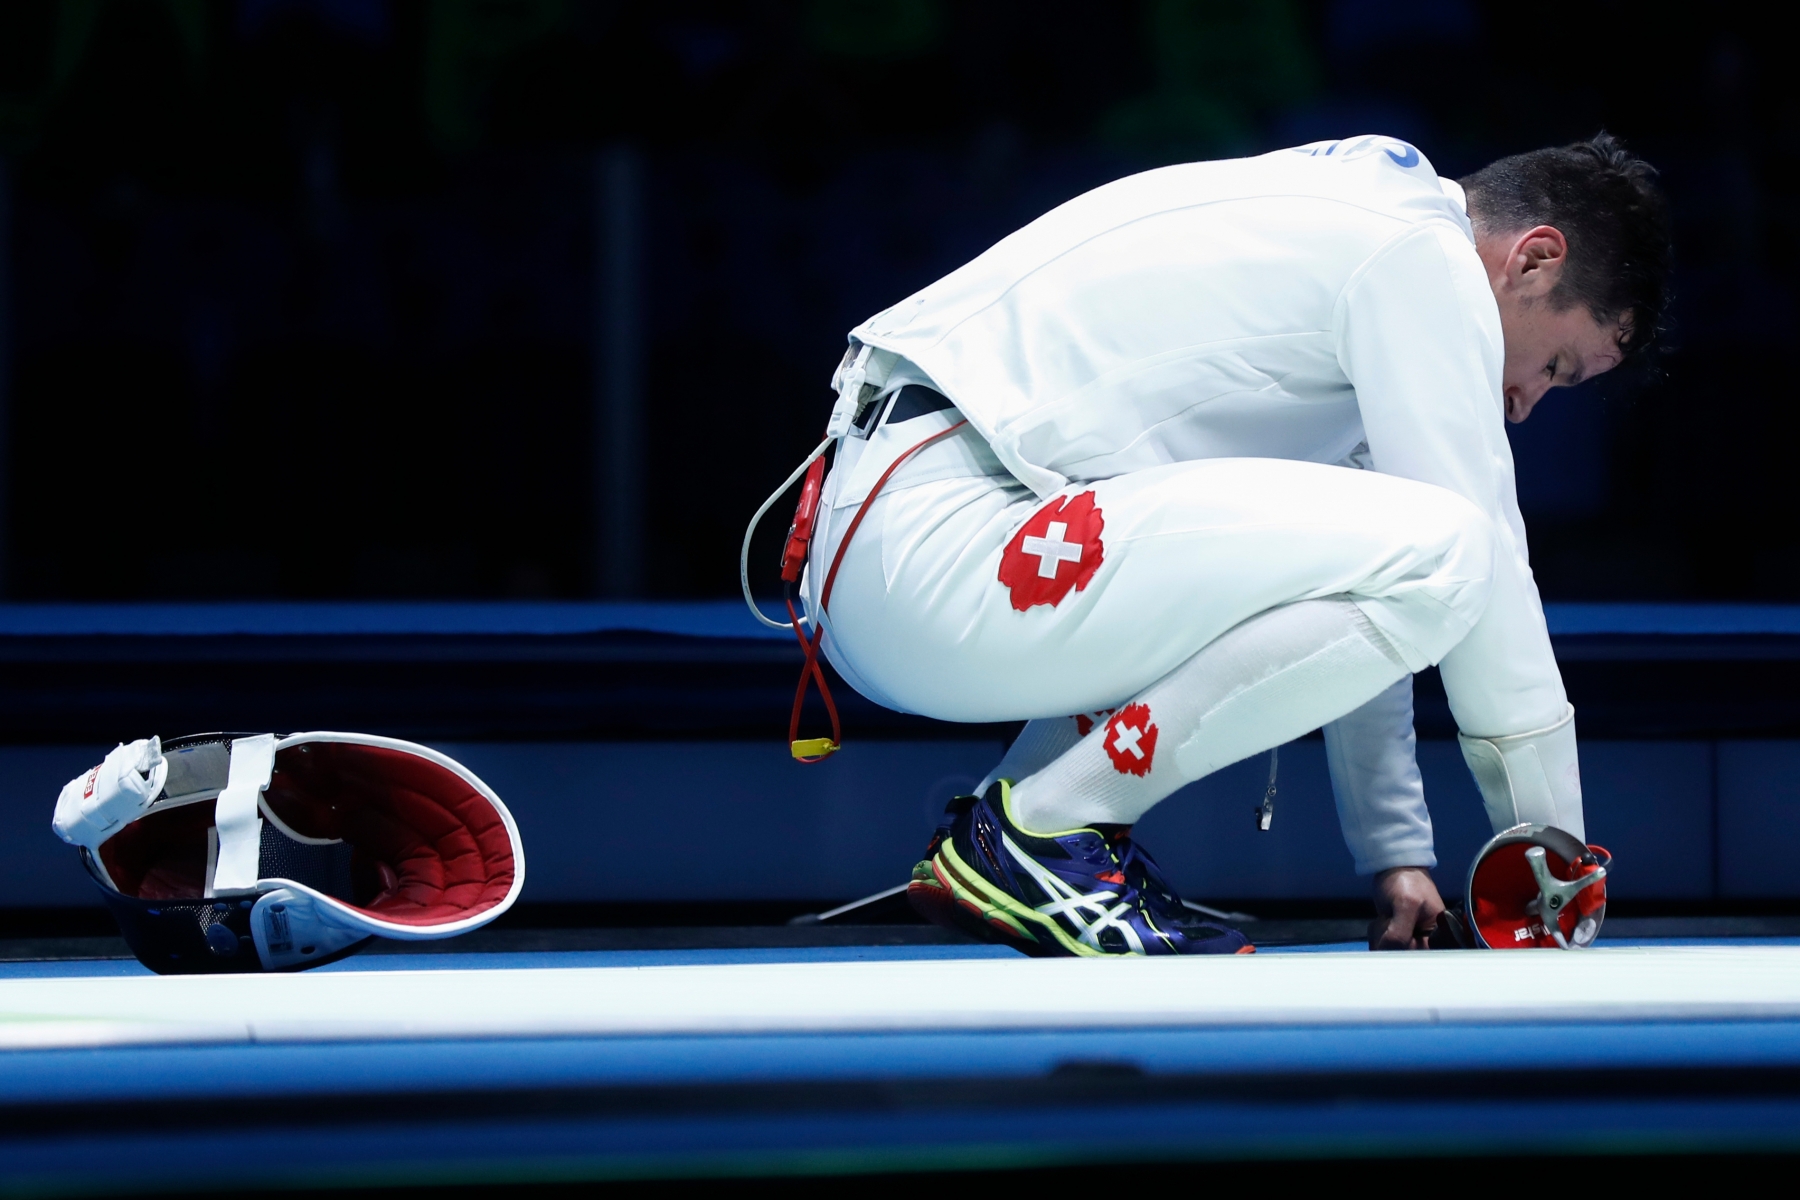 Switzerland's Fabian Kauter reacts after losing his match against France's Yannick Borel in the men's epee individual round of 16 in the Carioca Arena 3 in Rio de Janeiro, Brazil, at the Rio 2016 Olympic Summer Games, pictured on Tuesday, August 09, 2016. (KEYSTONE/Peter Klaunzer)kauter BRAZIL RIO OLYMPICS 2016 FENCING